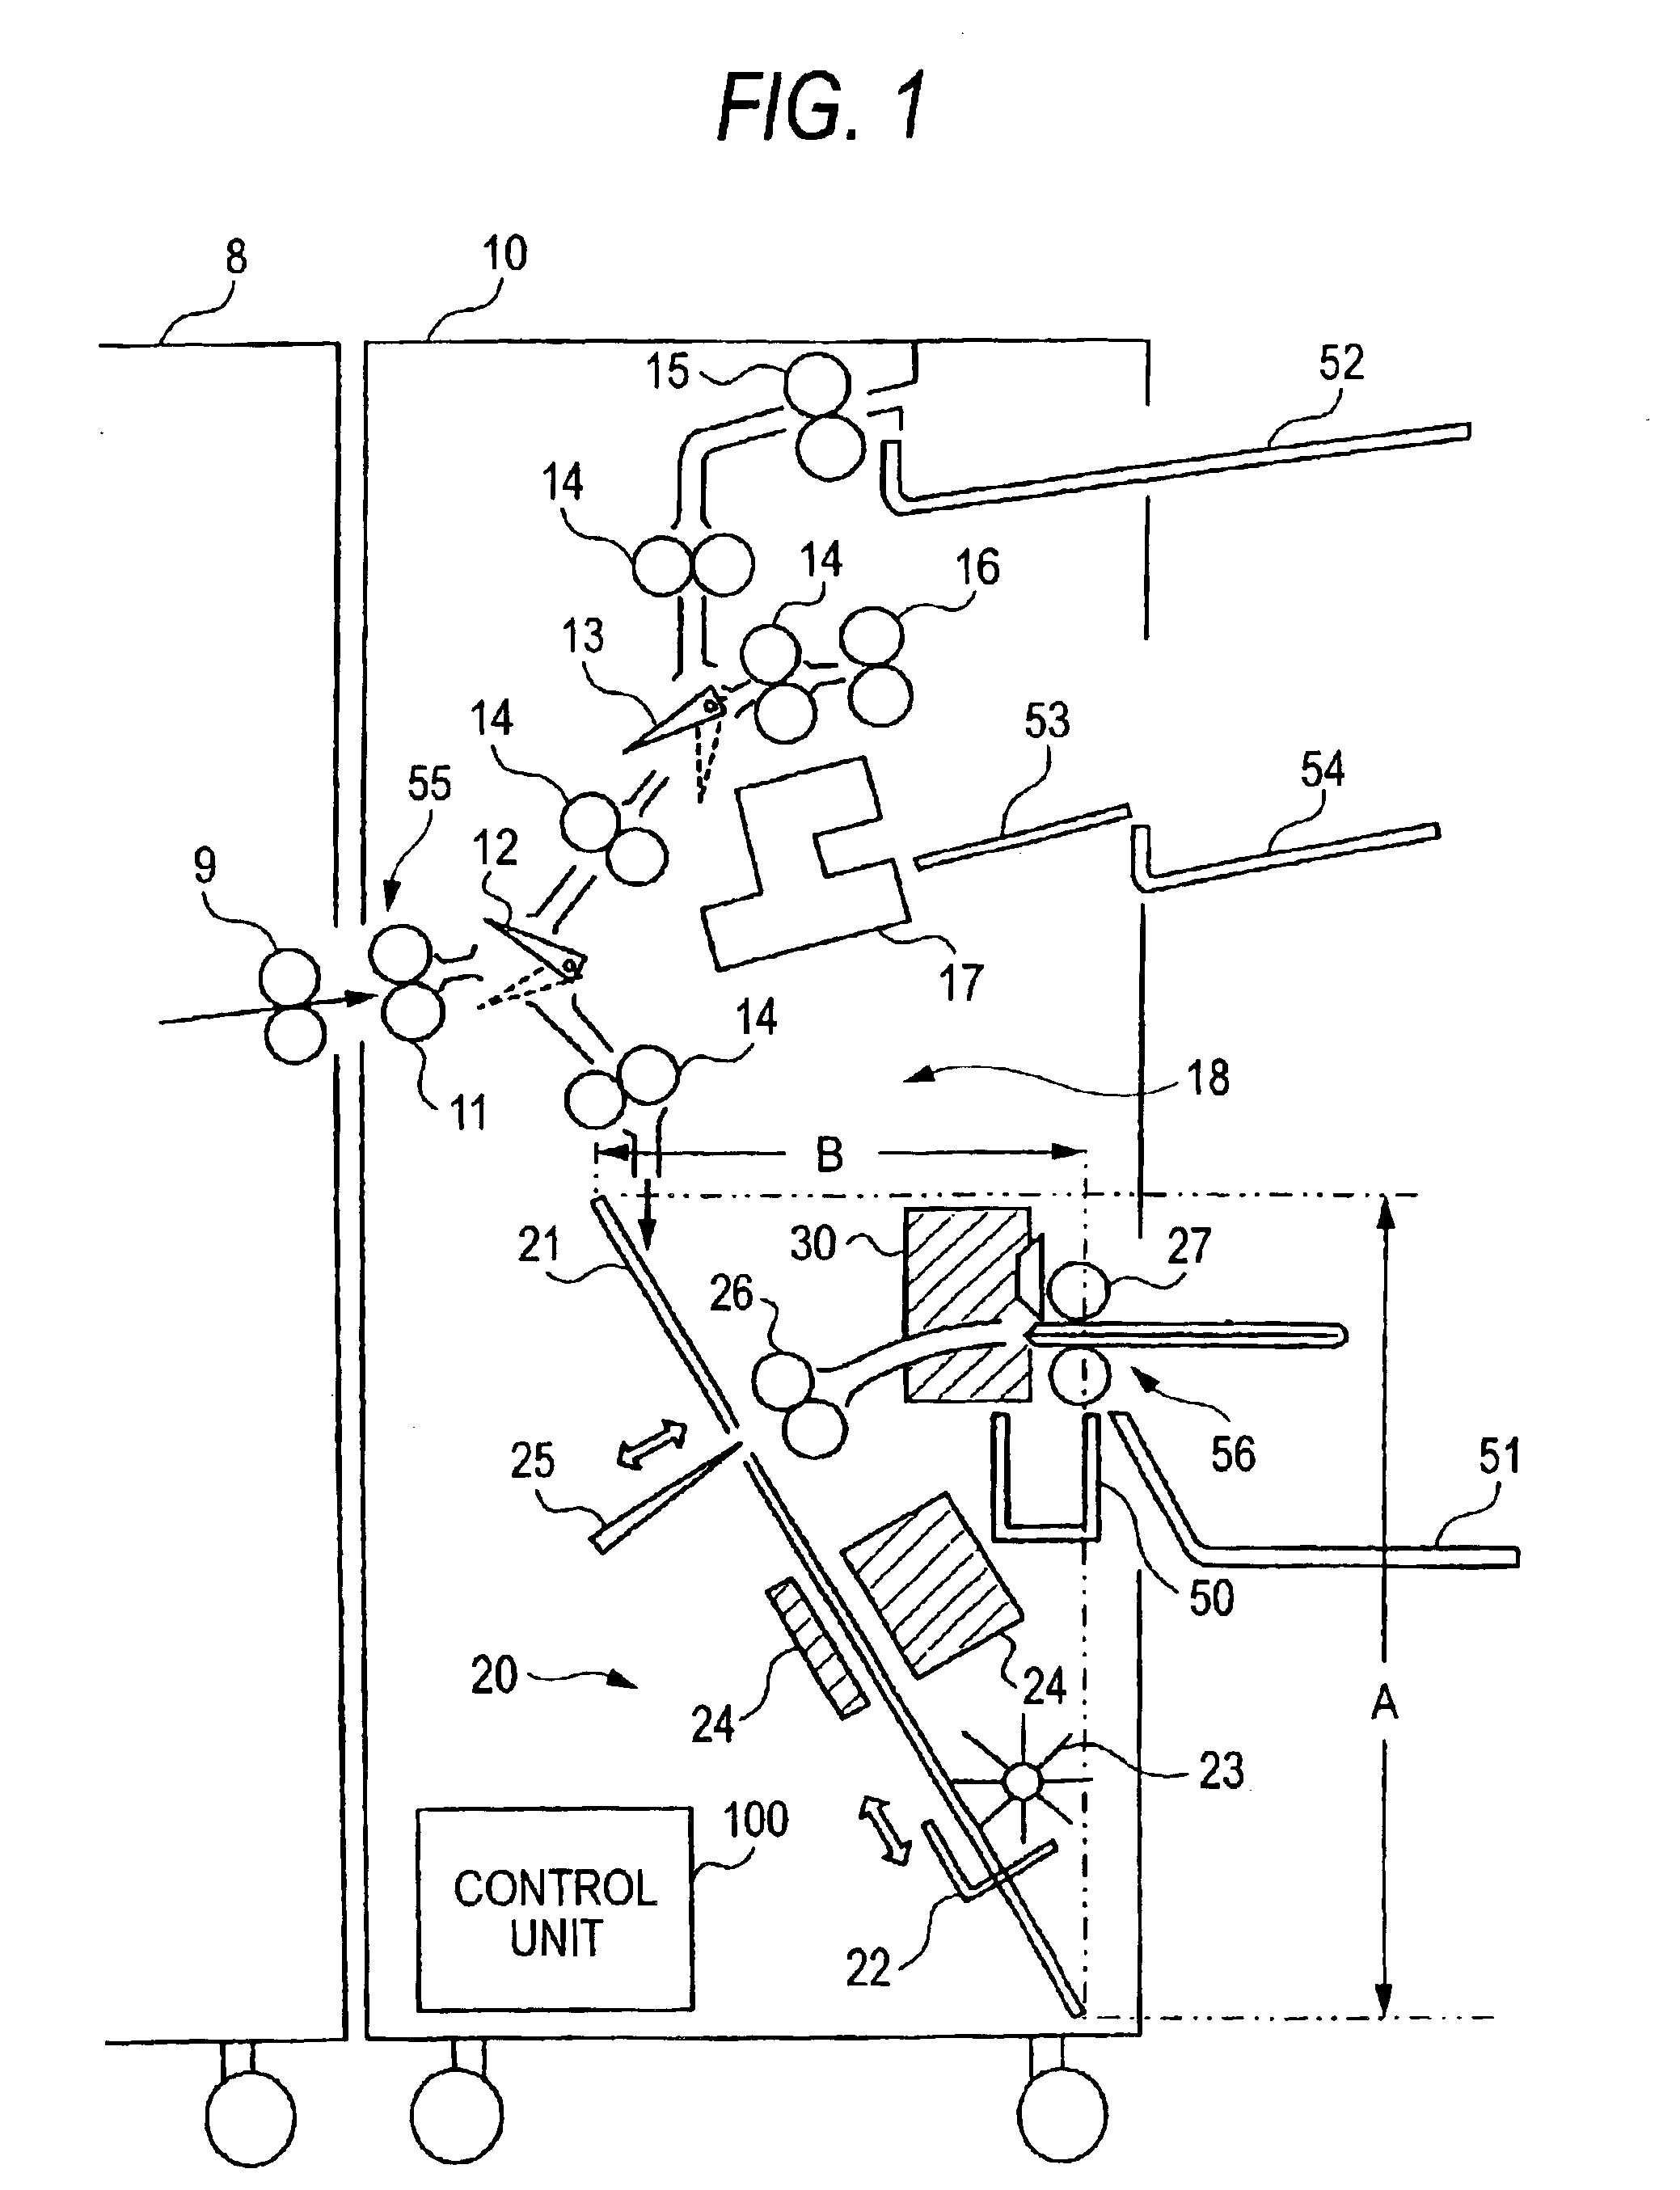 Paper processing apparatus and cutter unit